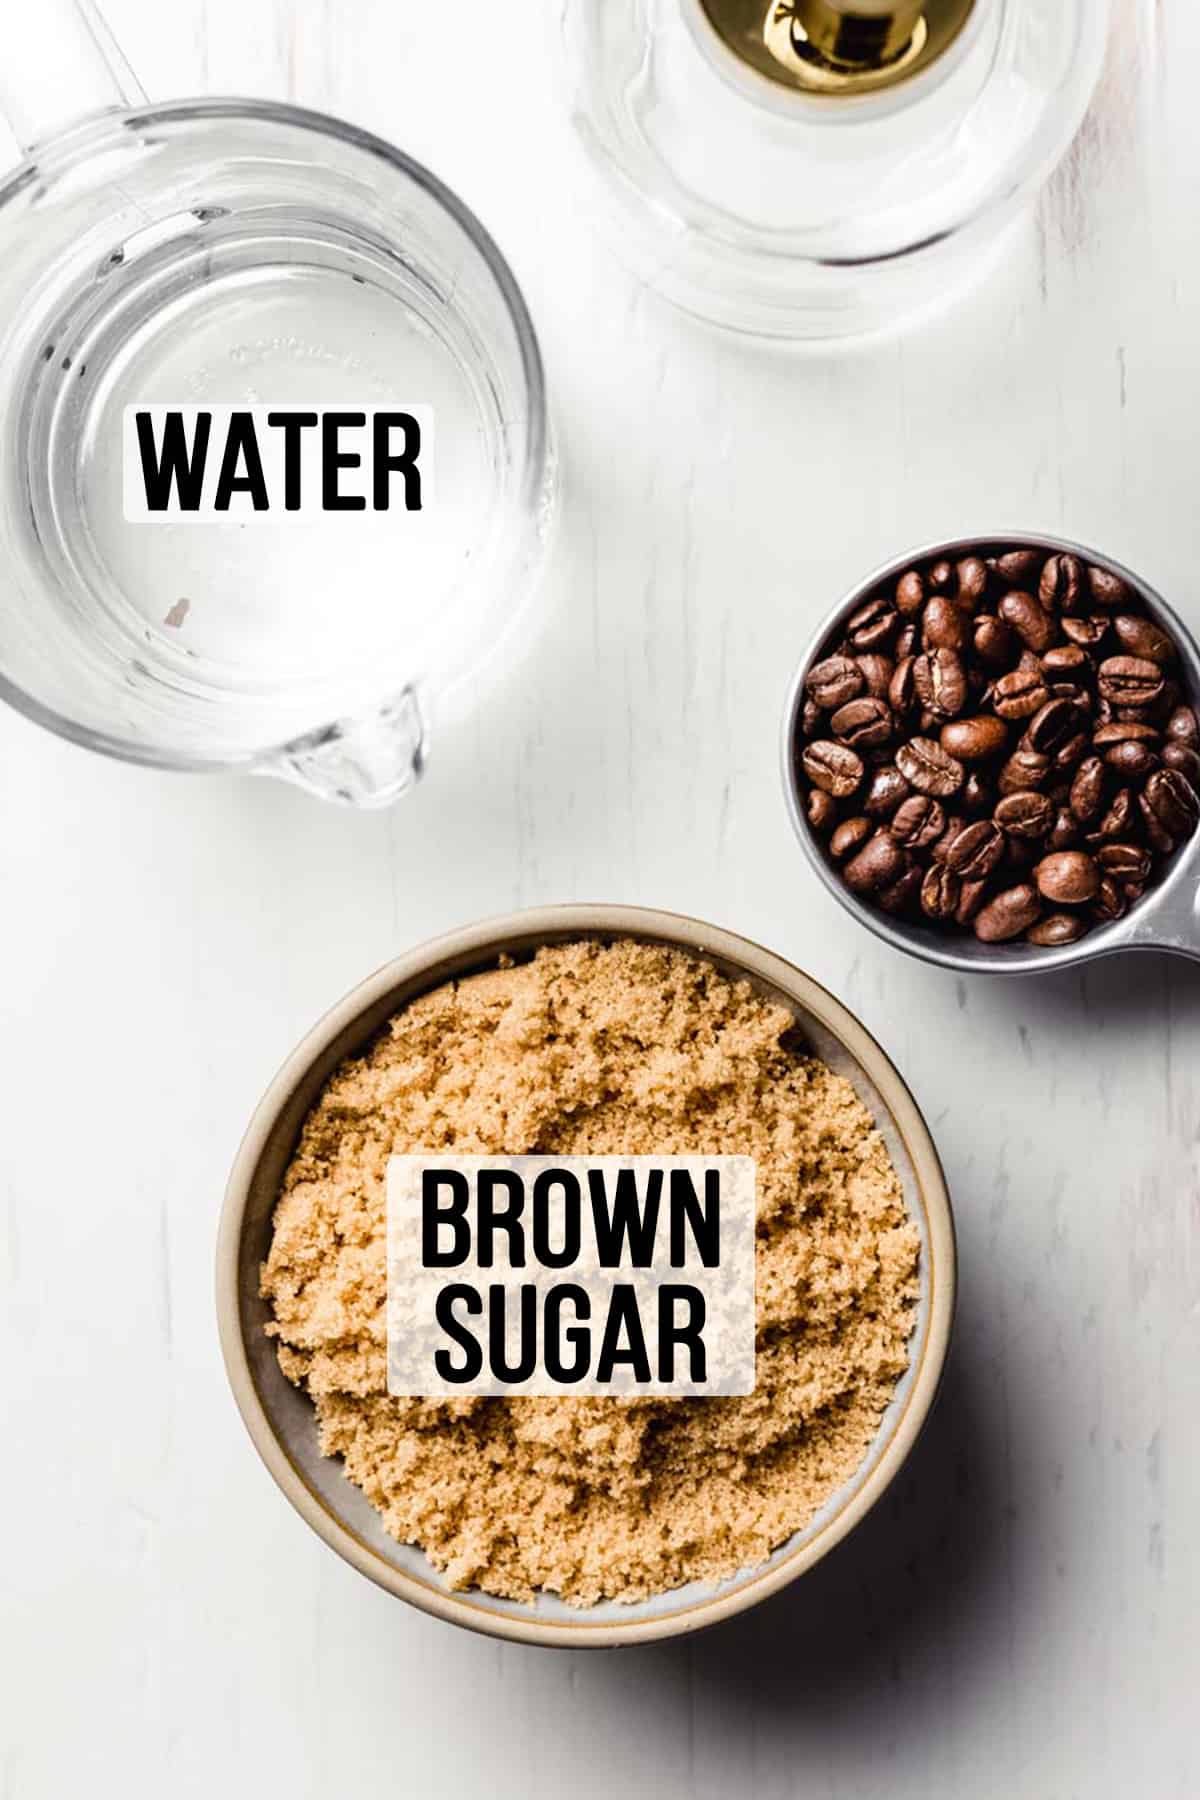 Brown sugar in a bowl next to water in a measuring cup, coffee beans, and a glass jar with pump.